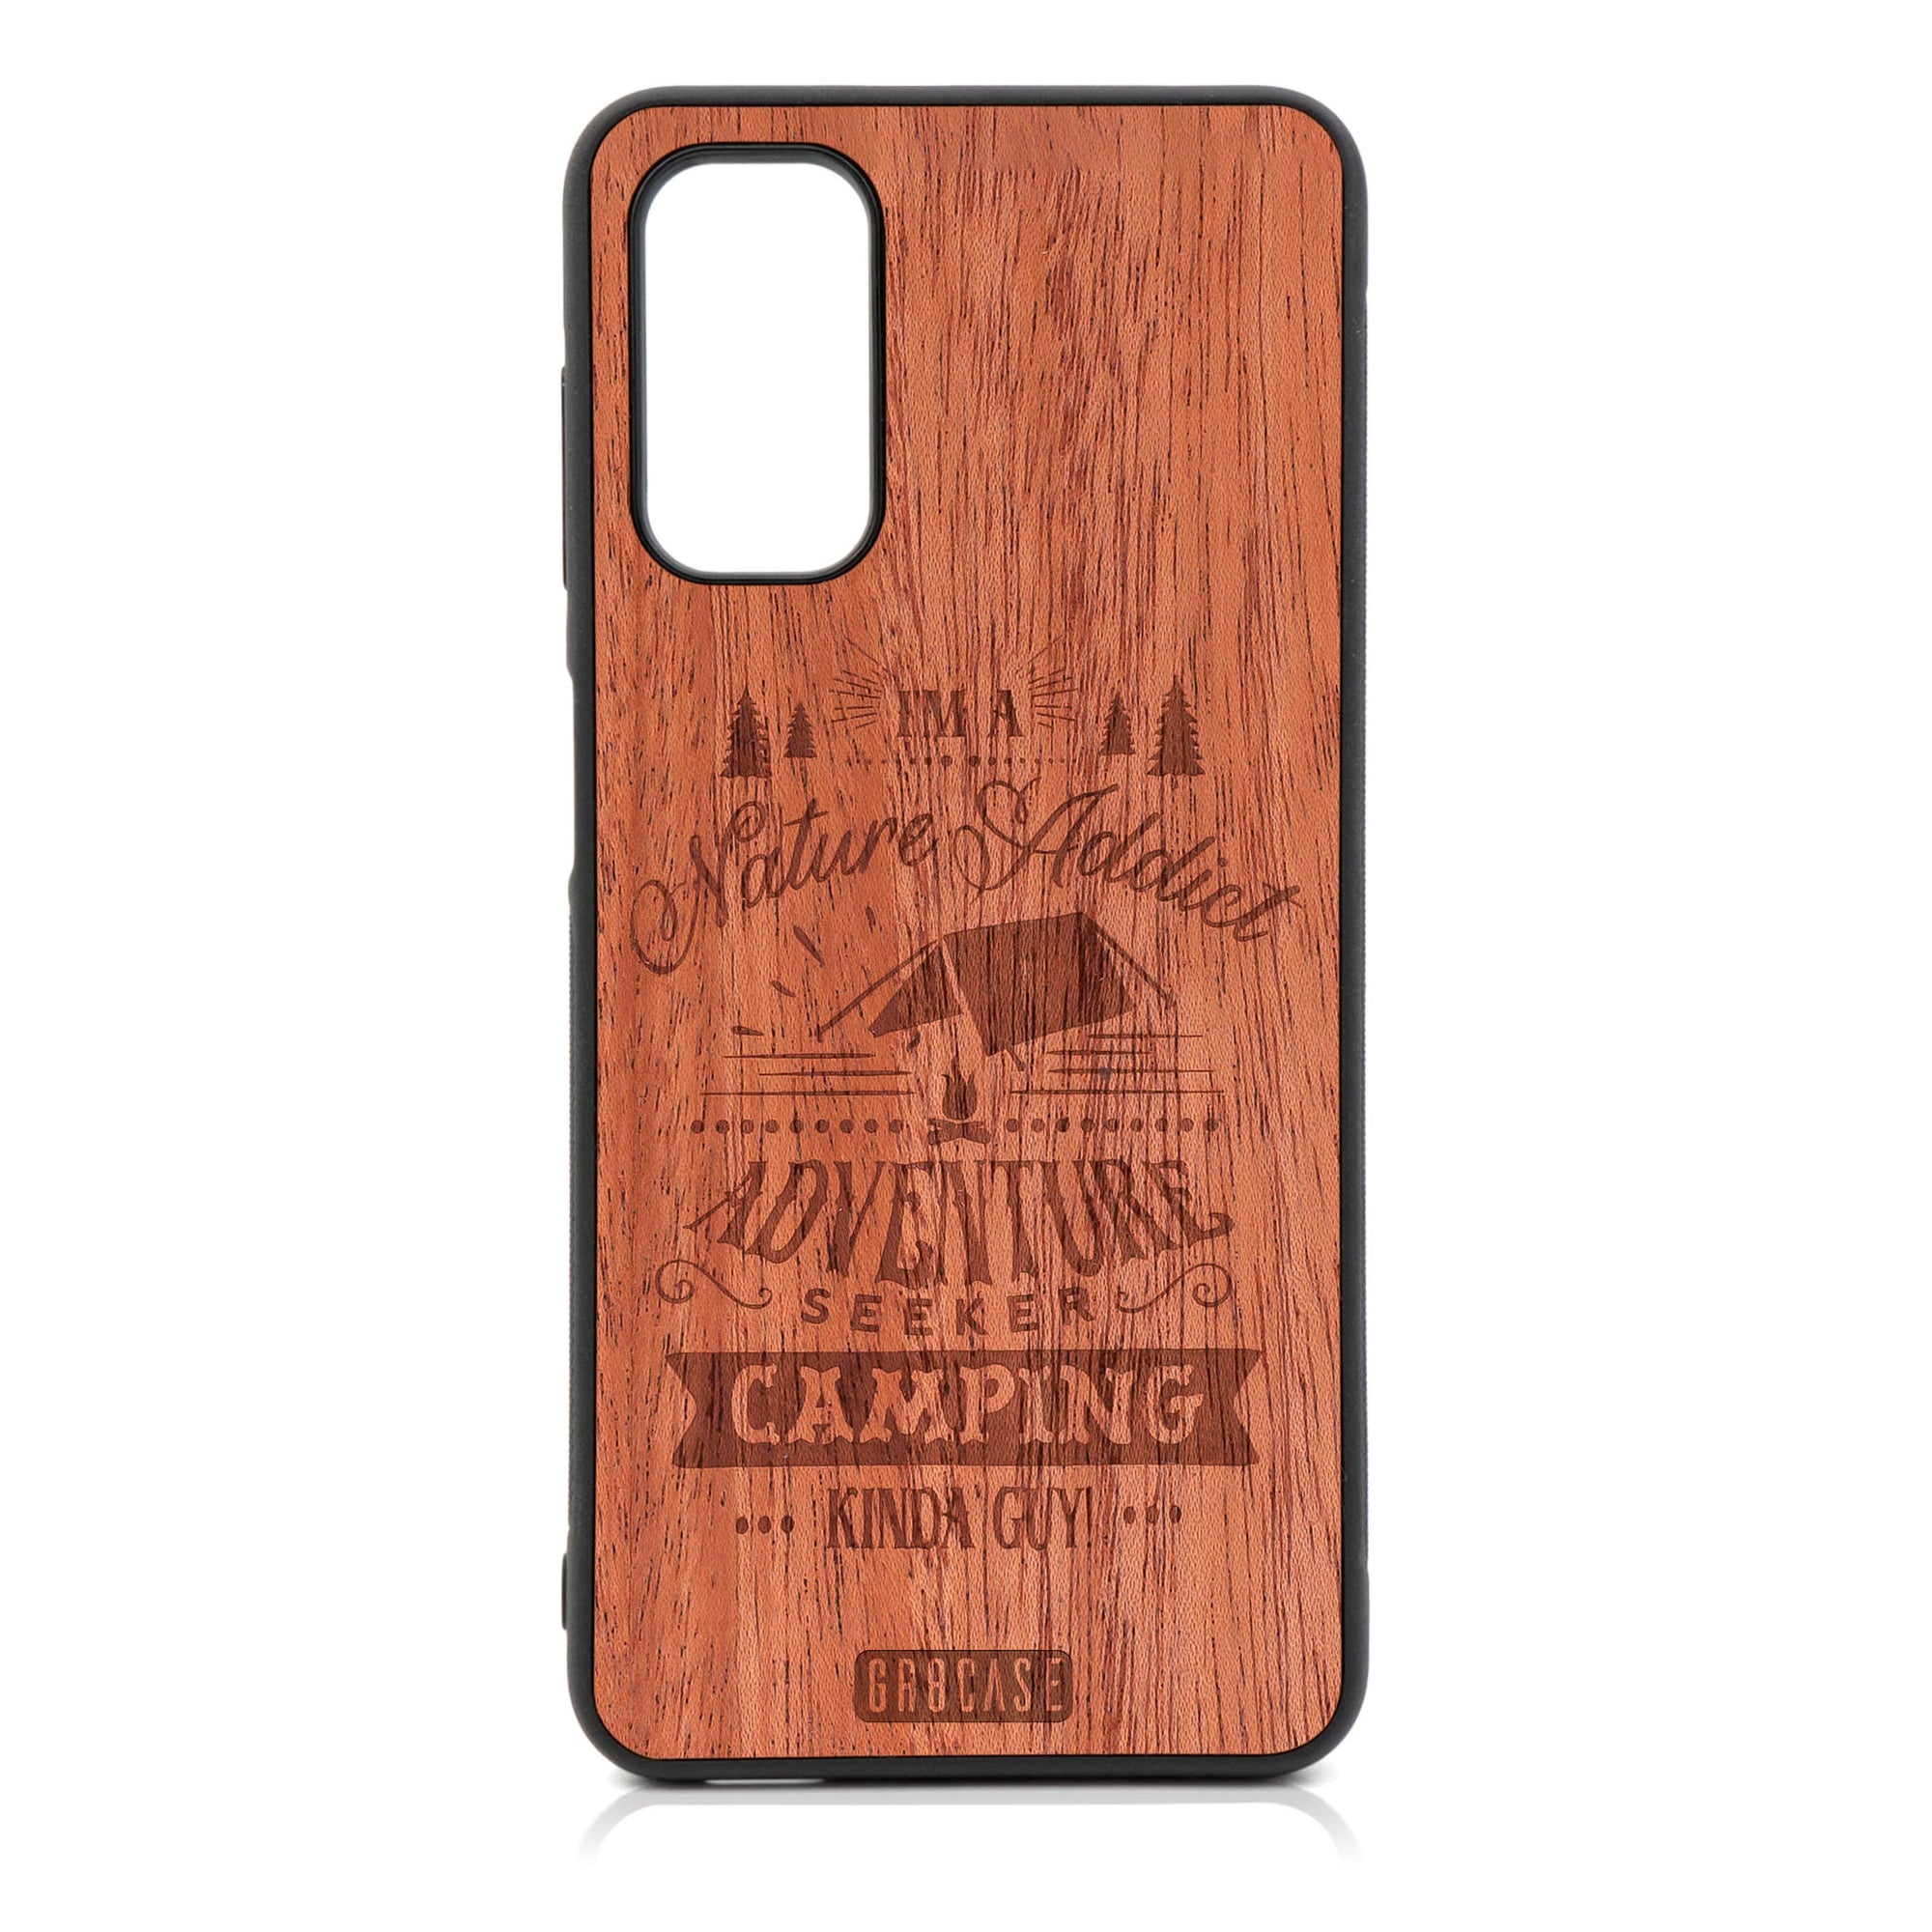 I'm A Nature Addict Adventure Seeker Camping Kinda Guy Design Wood Case For Galaxy A13 5G